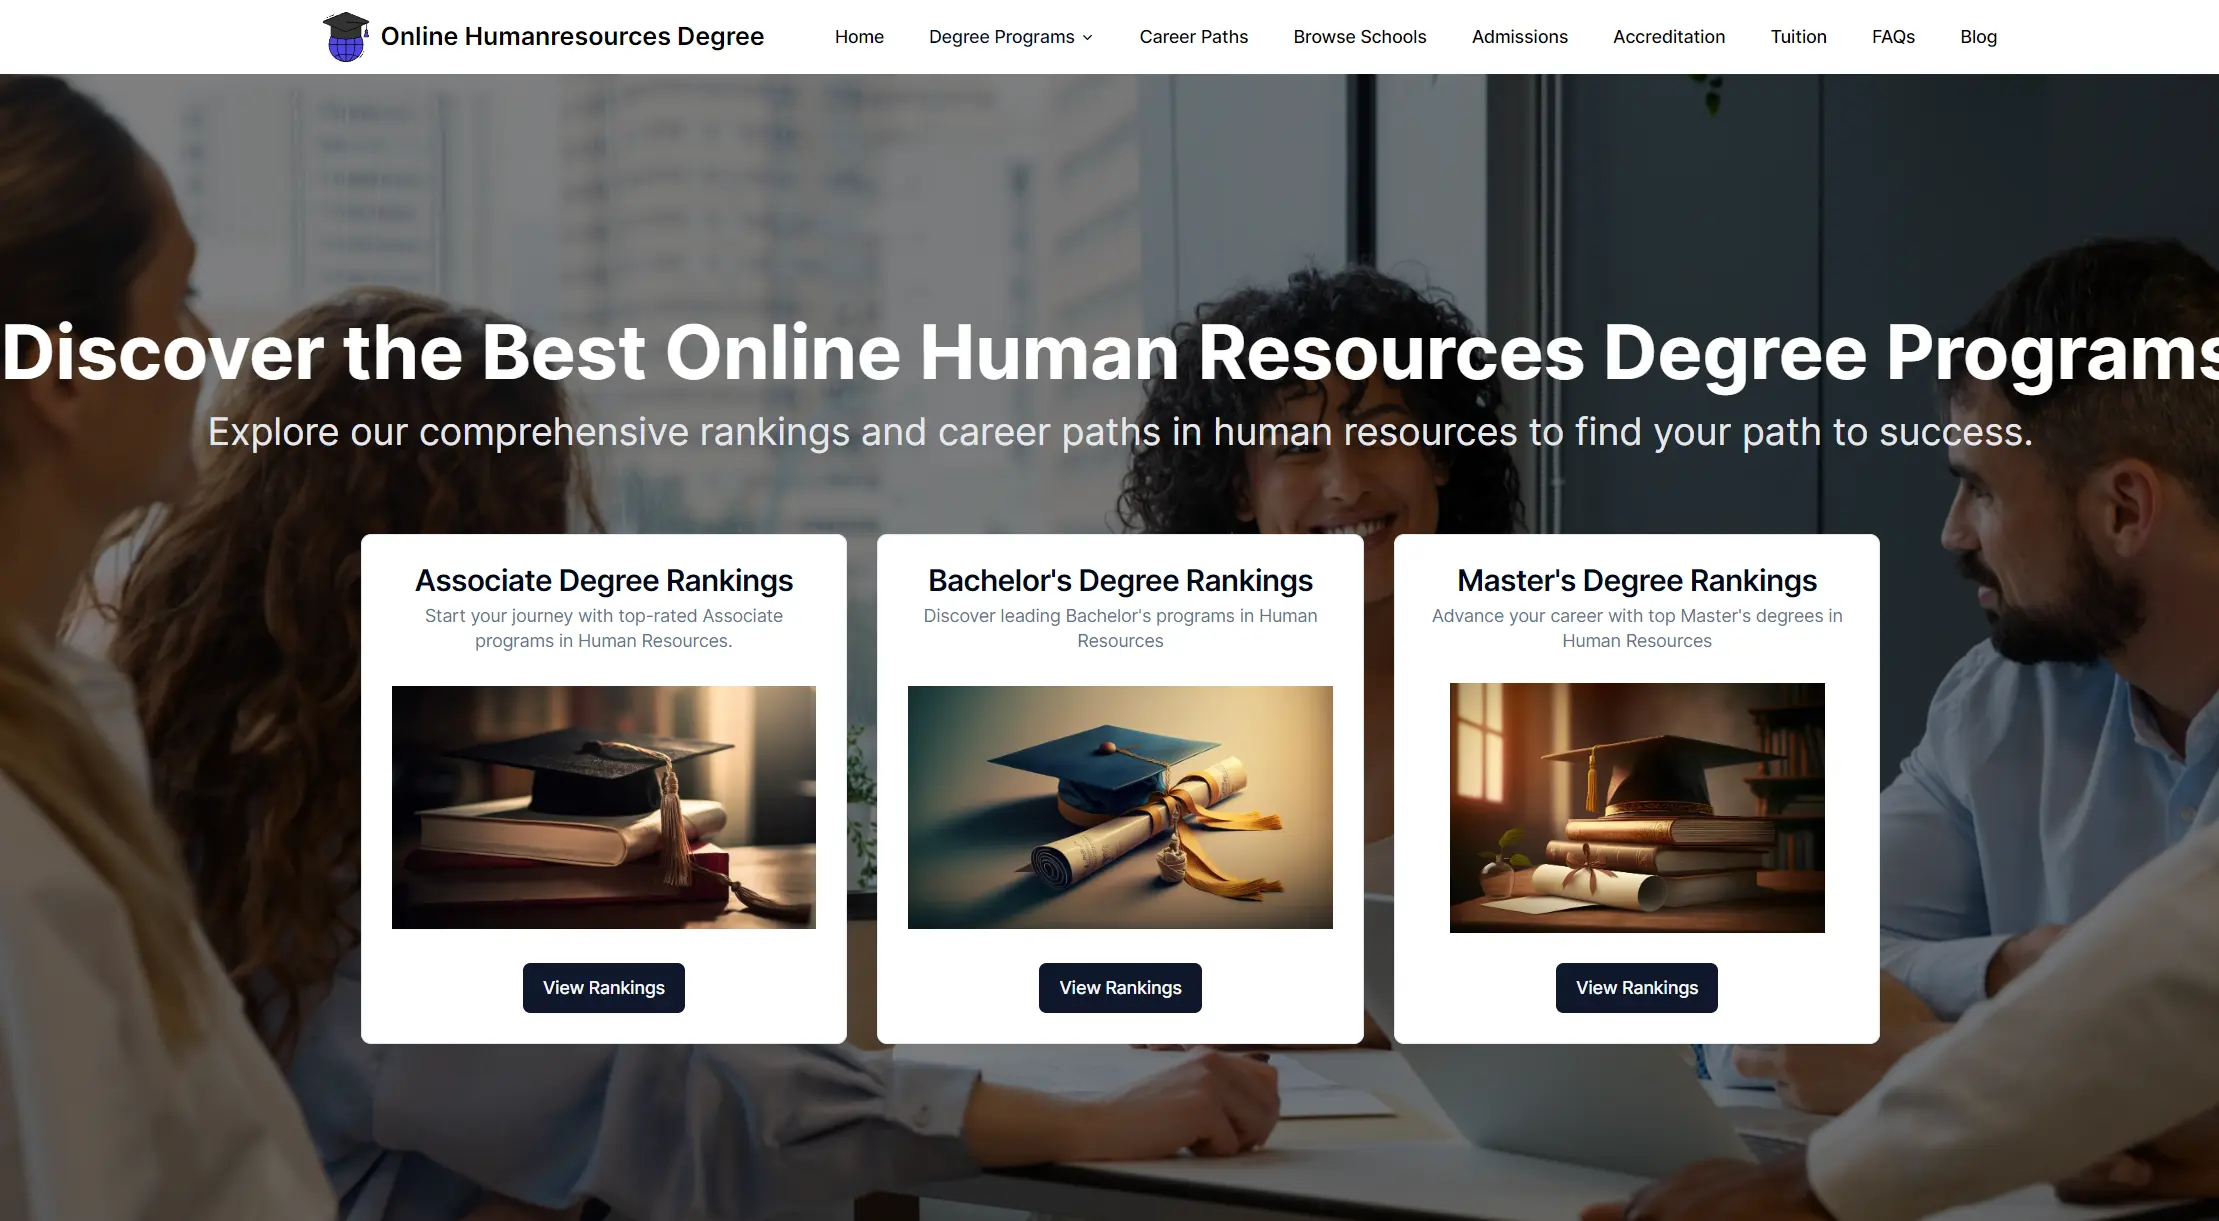 Online Human Resources Degrees site thumbnail